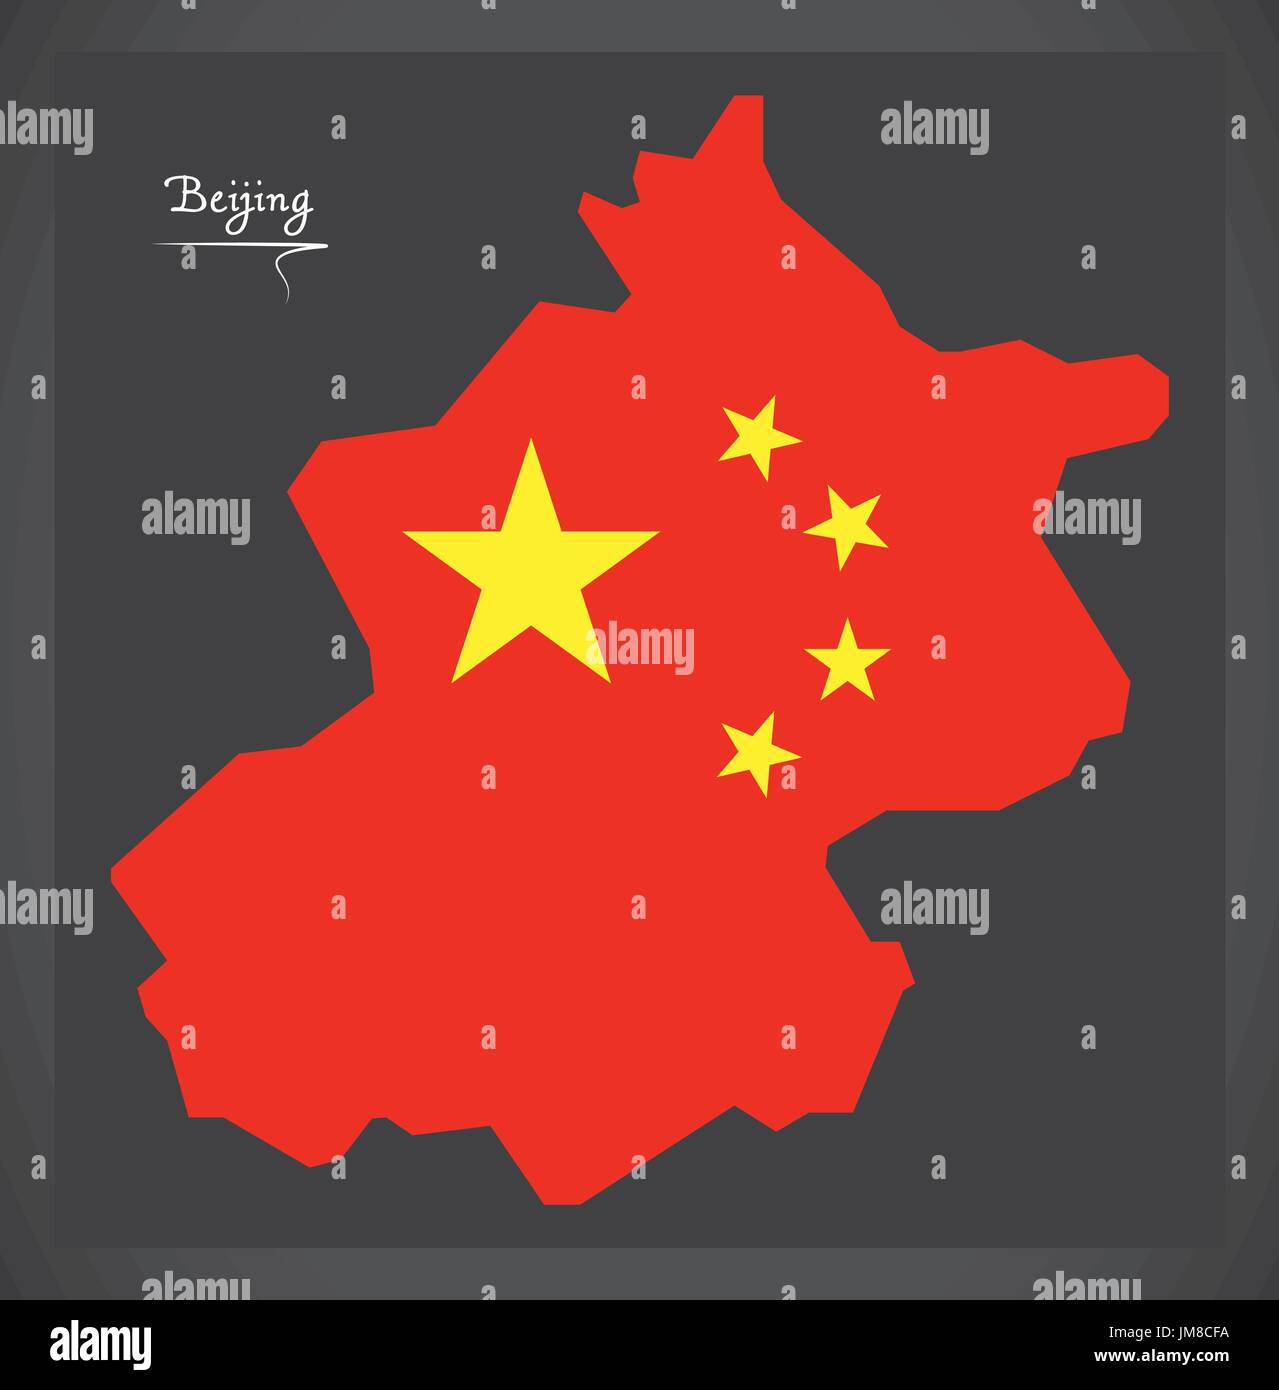 Beijing China map with Chinese national flag illustration Stock Vector